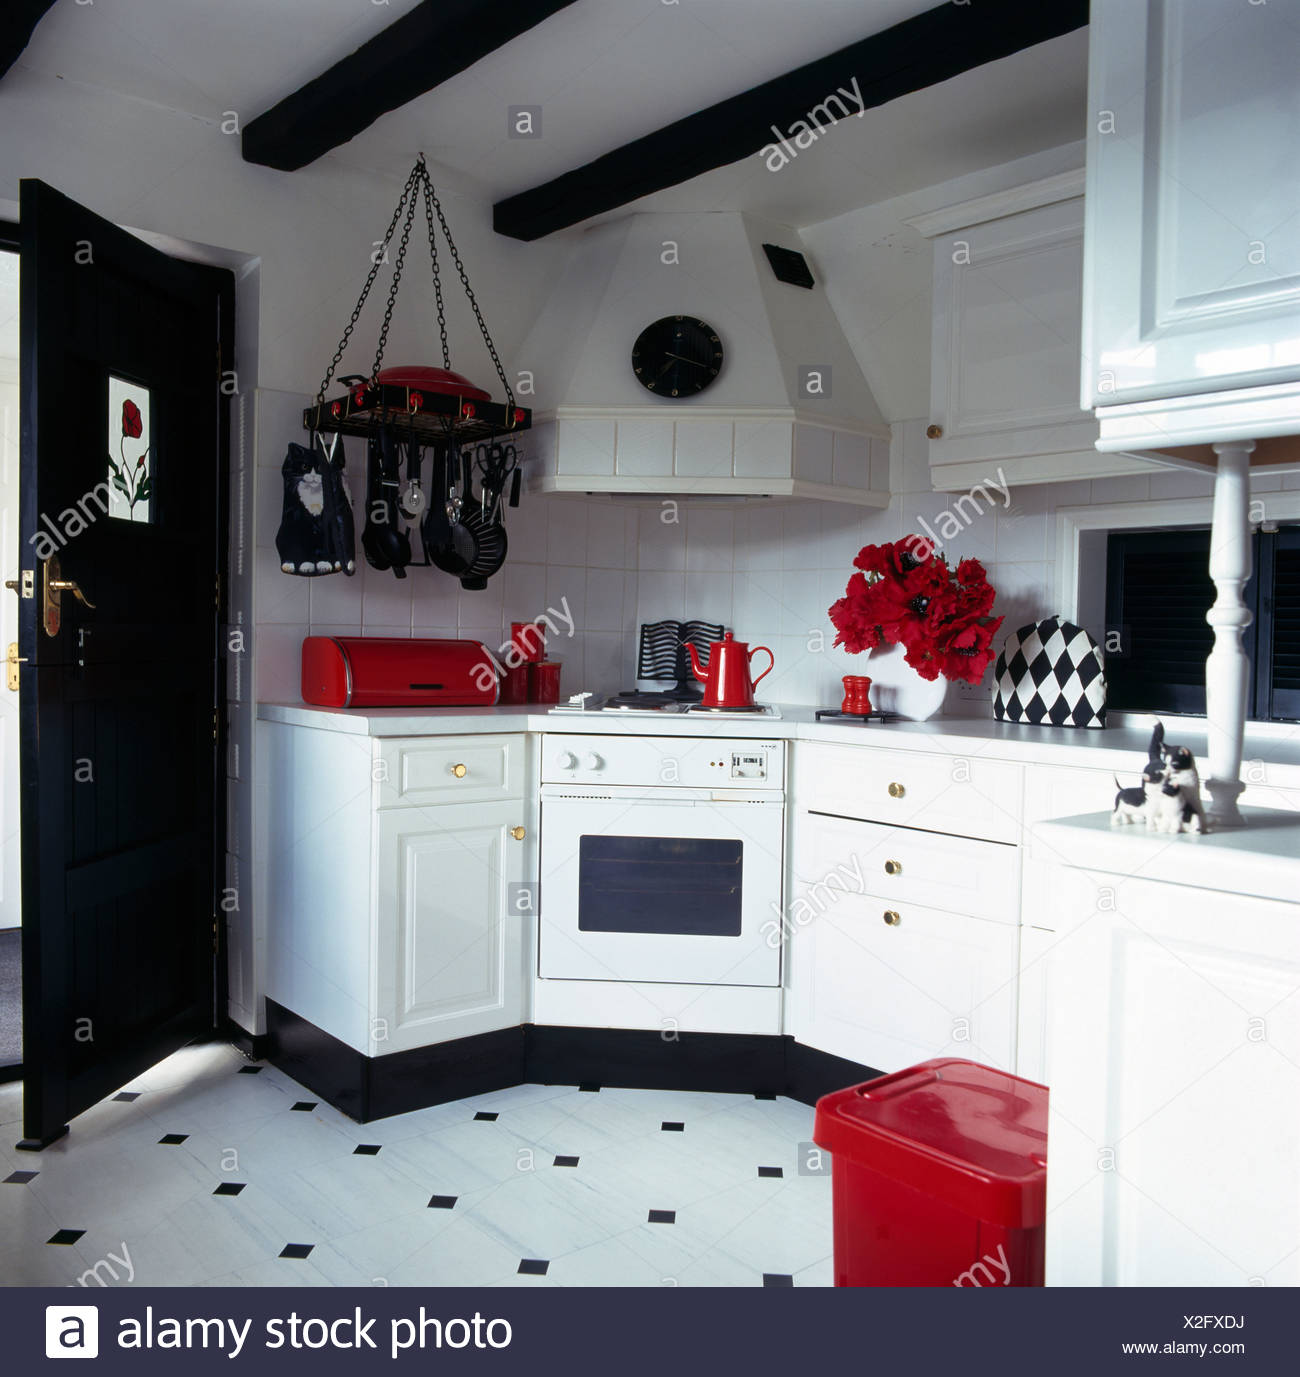 Red Accessories In Black And White Kitchen With Black White Vinyl